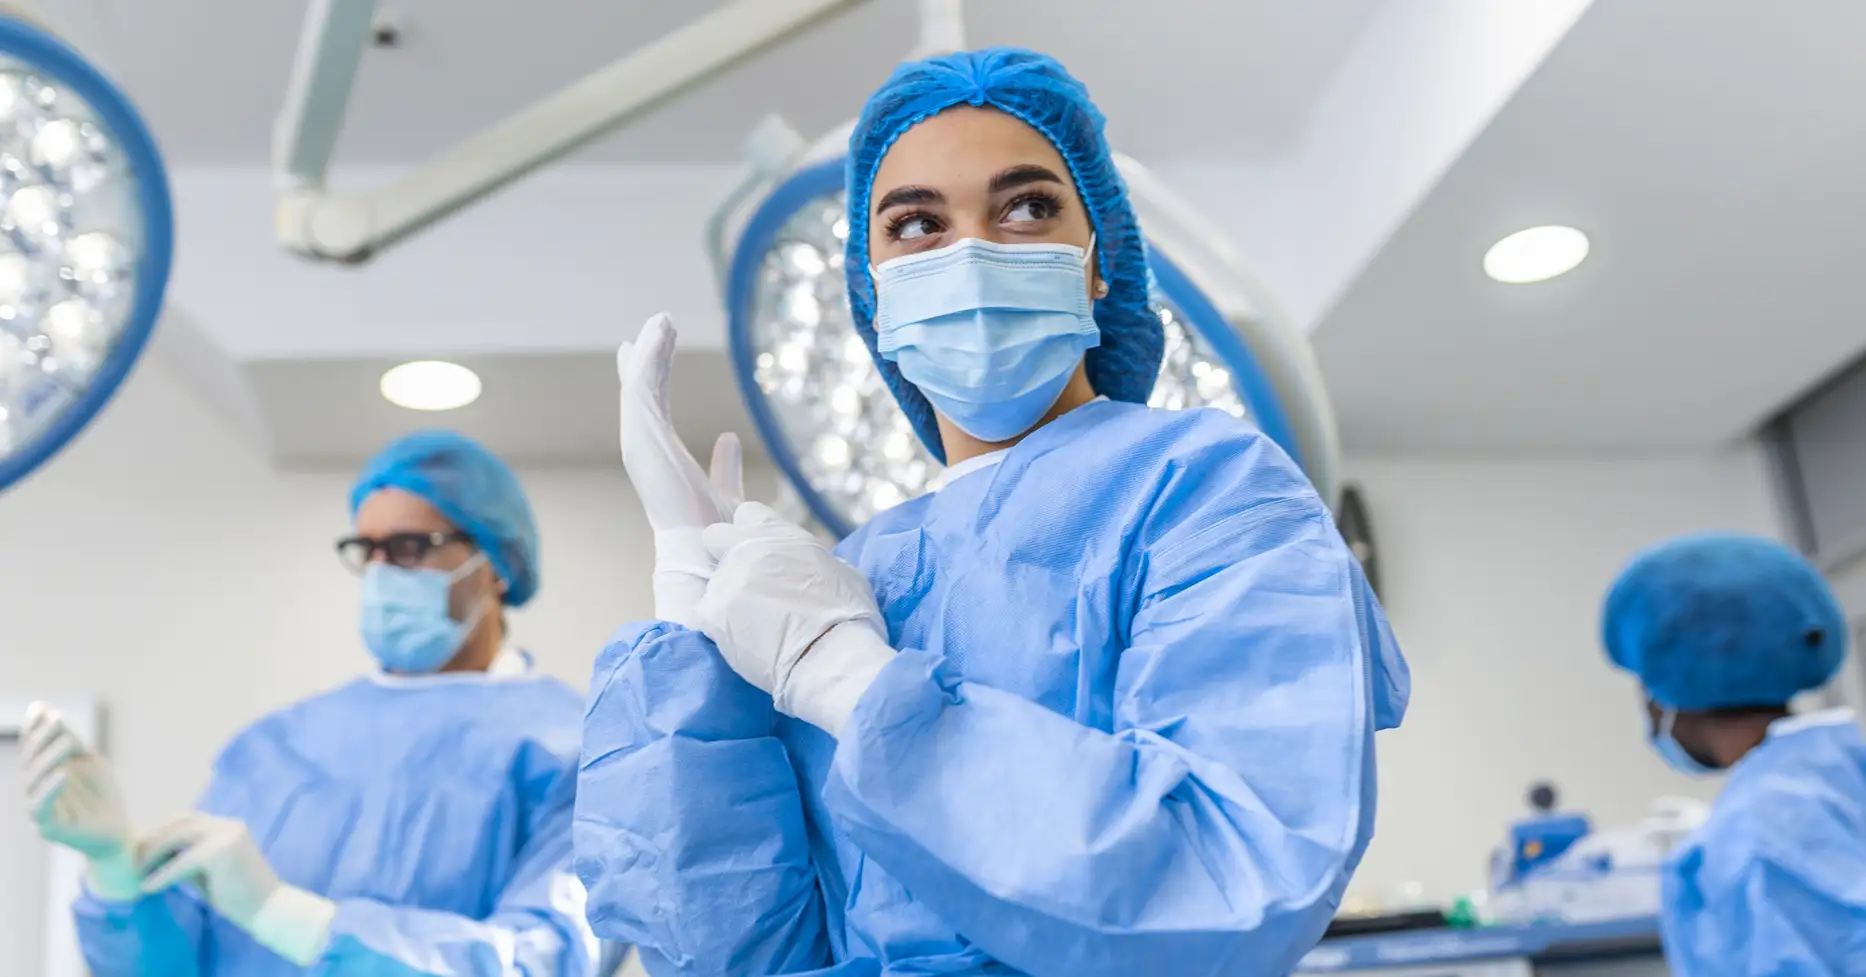 Surgeon in oerating room adjusting rubber gloves on hands